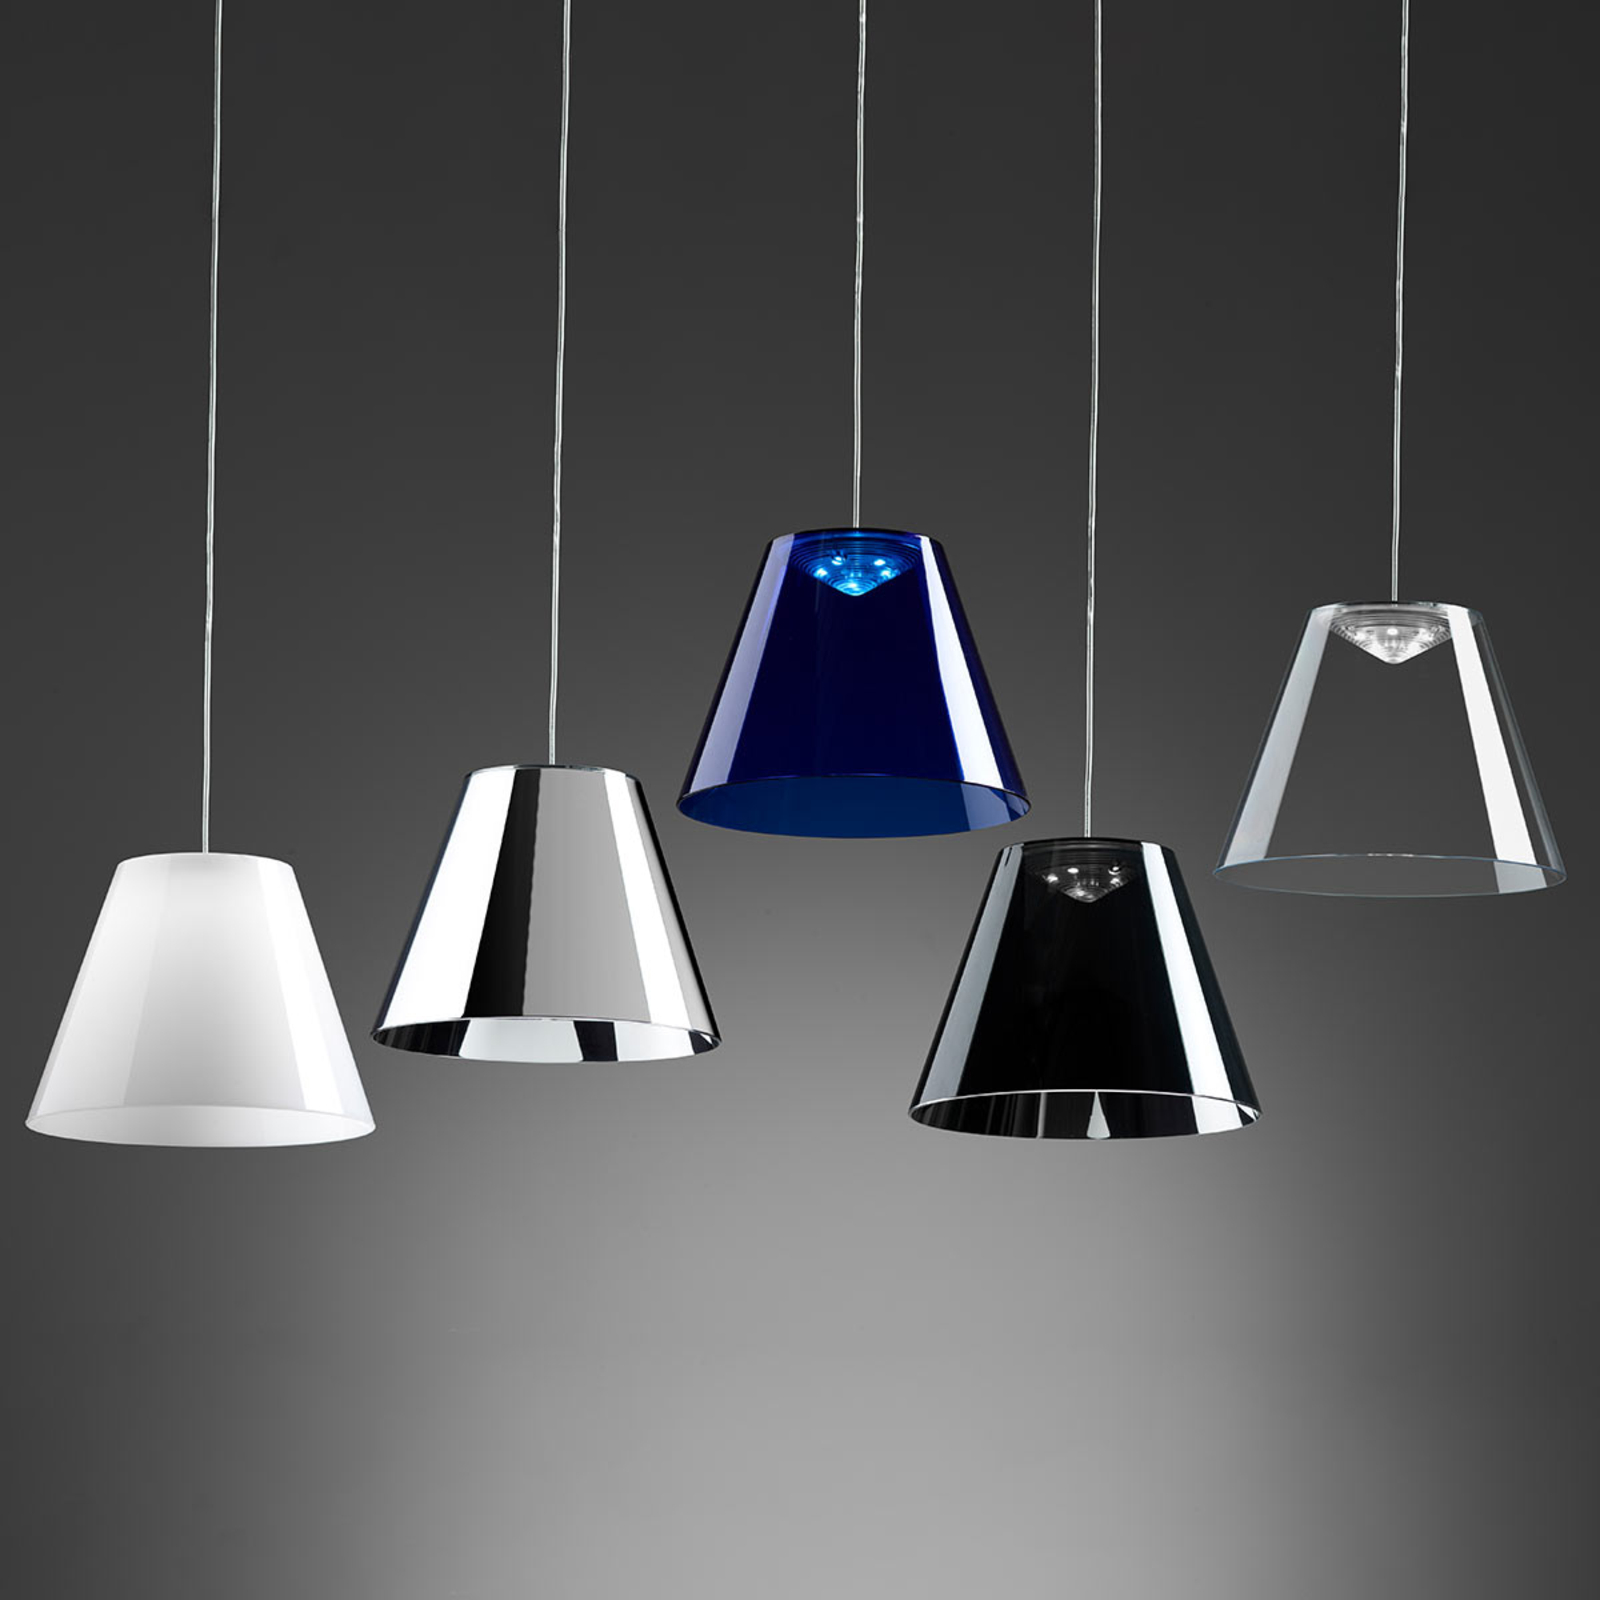 Dina - LED hanging light with a blue lampshade